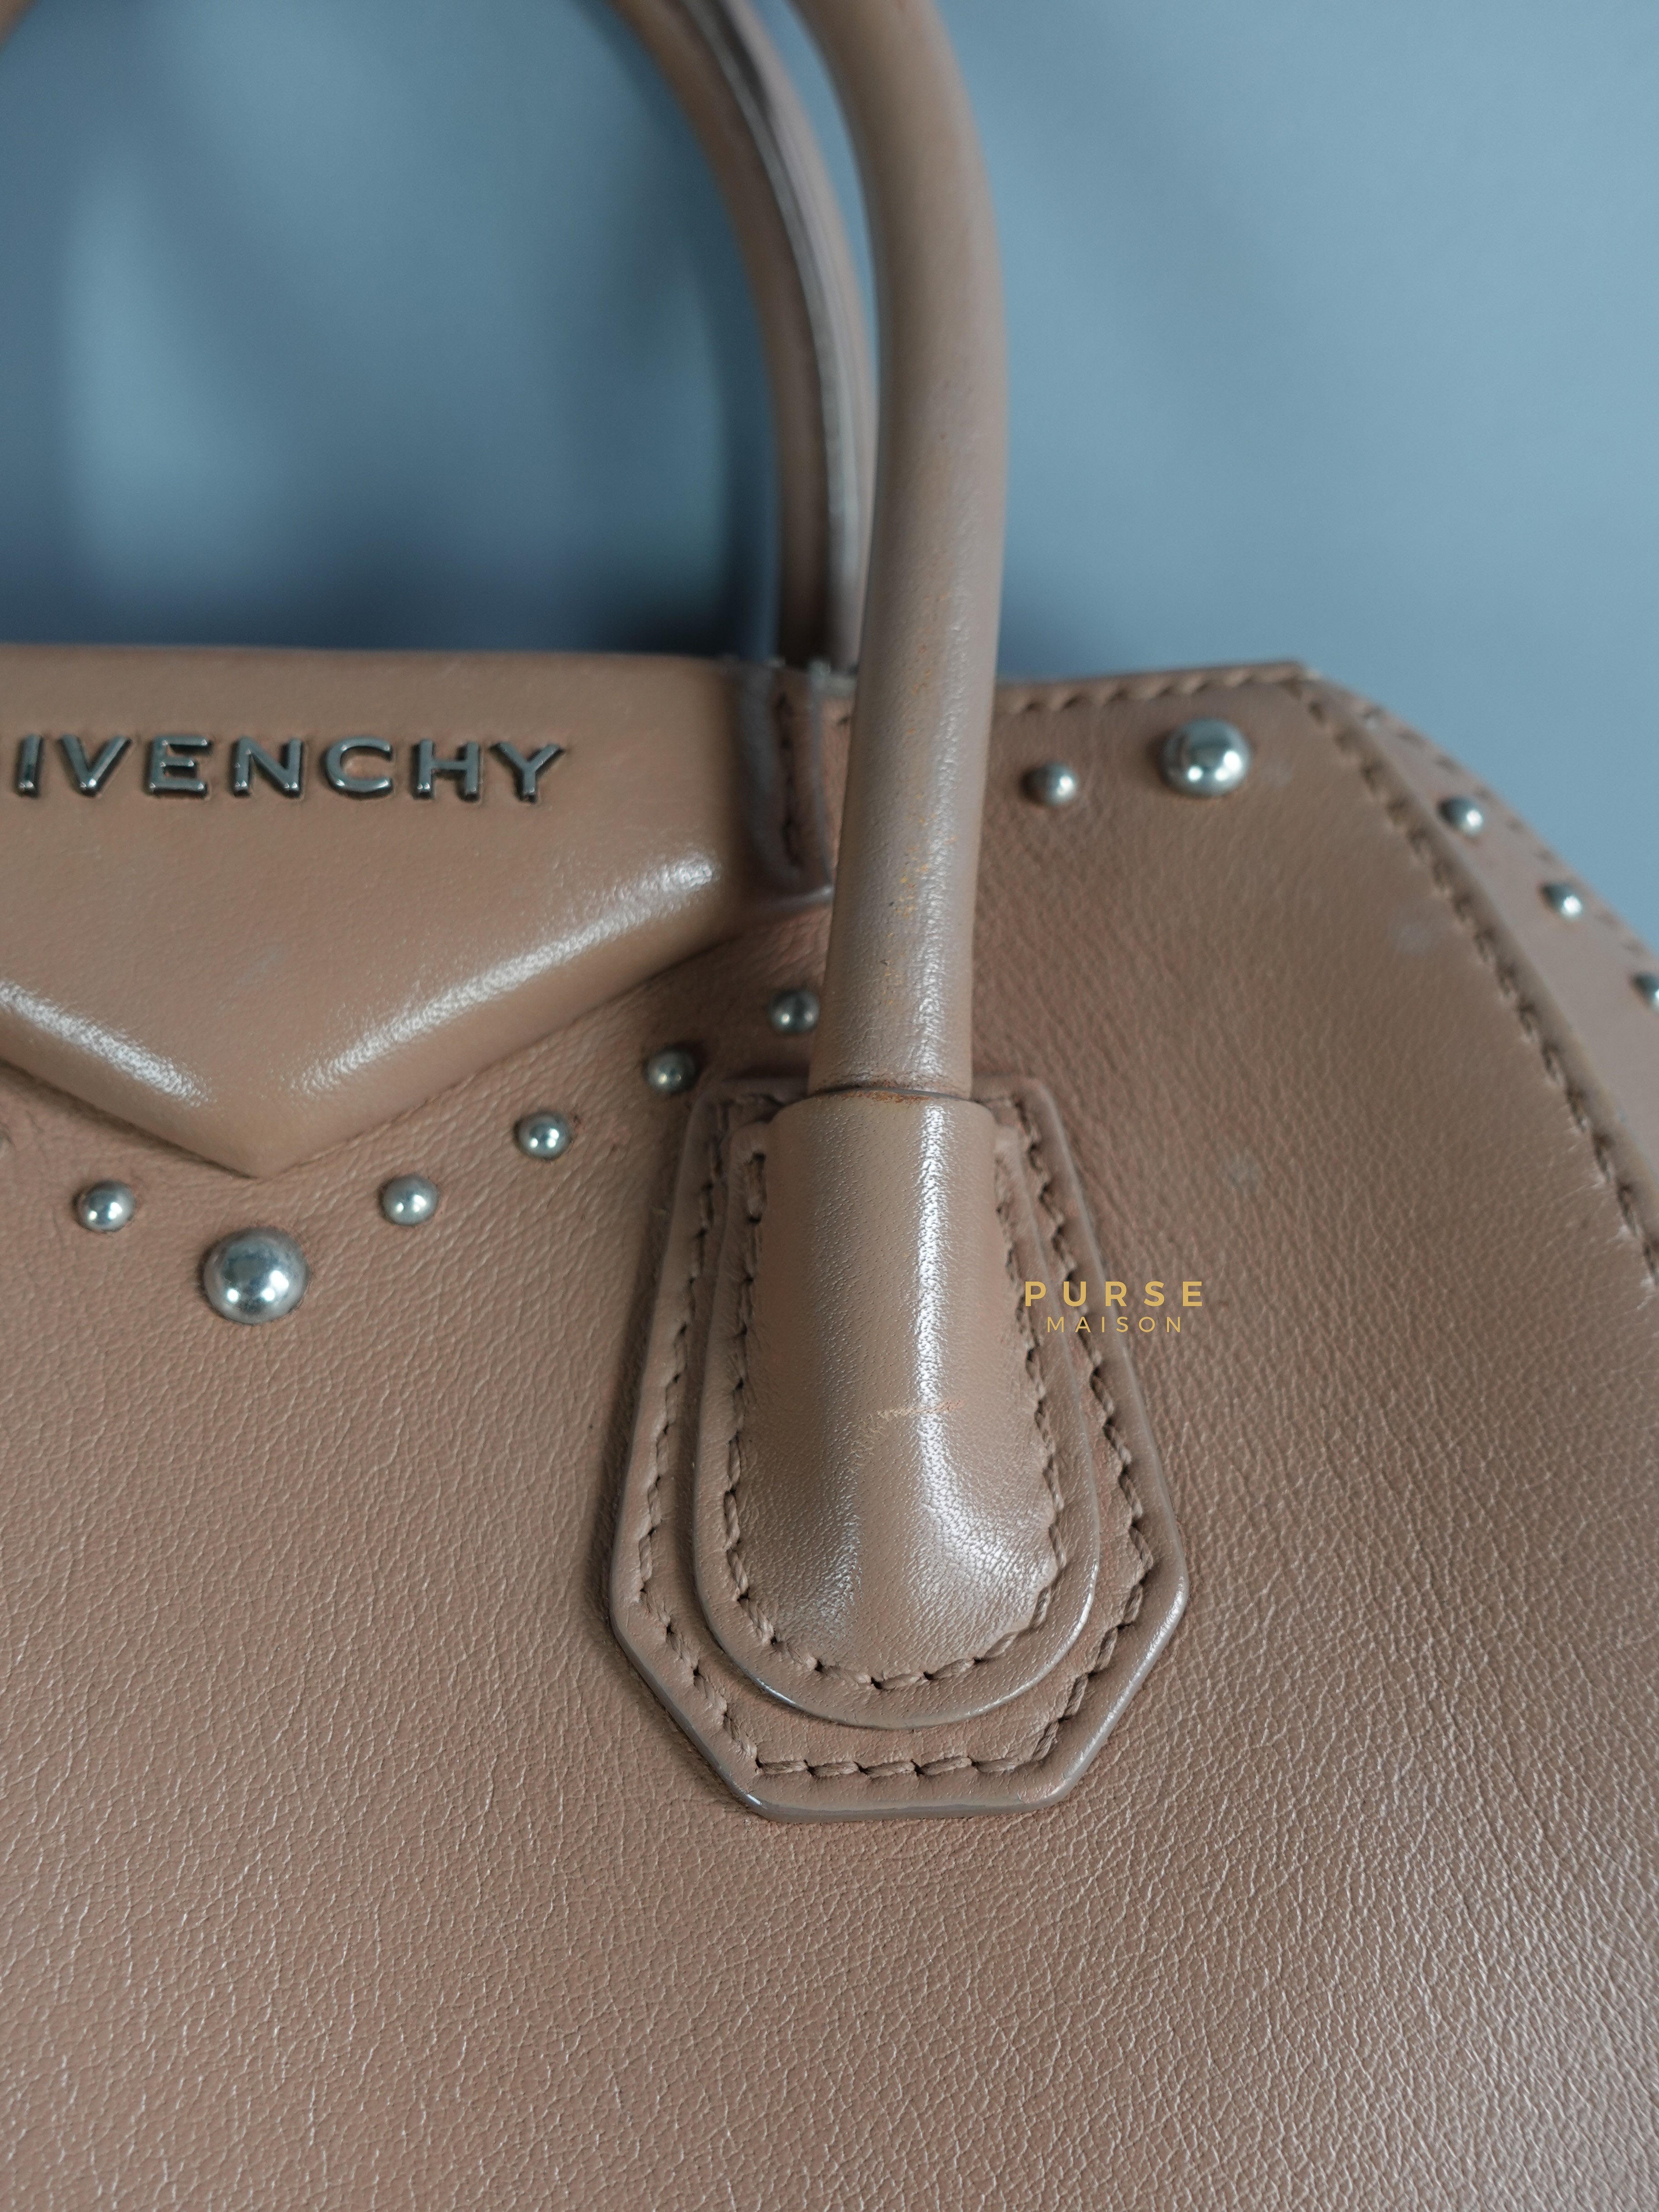 Givenchy Antigona Mini Studded Bag in Old Pink Calfskin Leather | Purse Maison Luxury Bags Shop